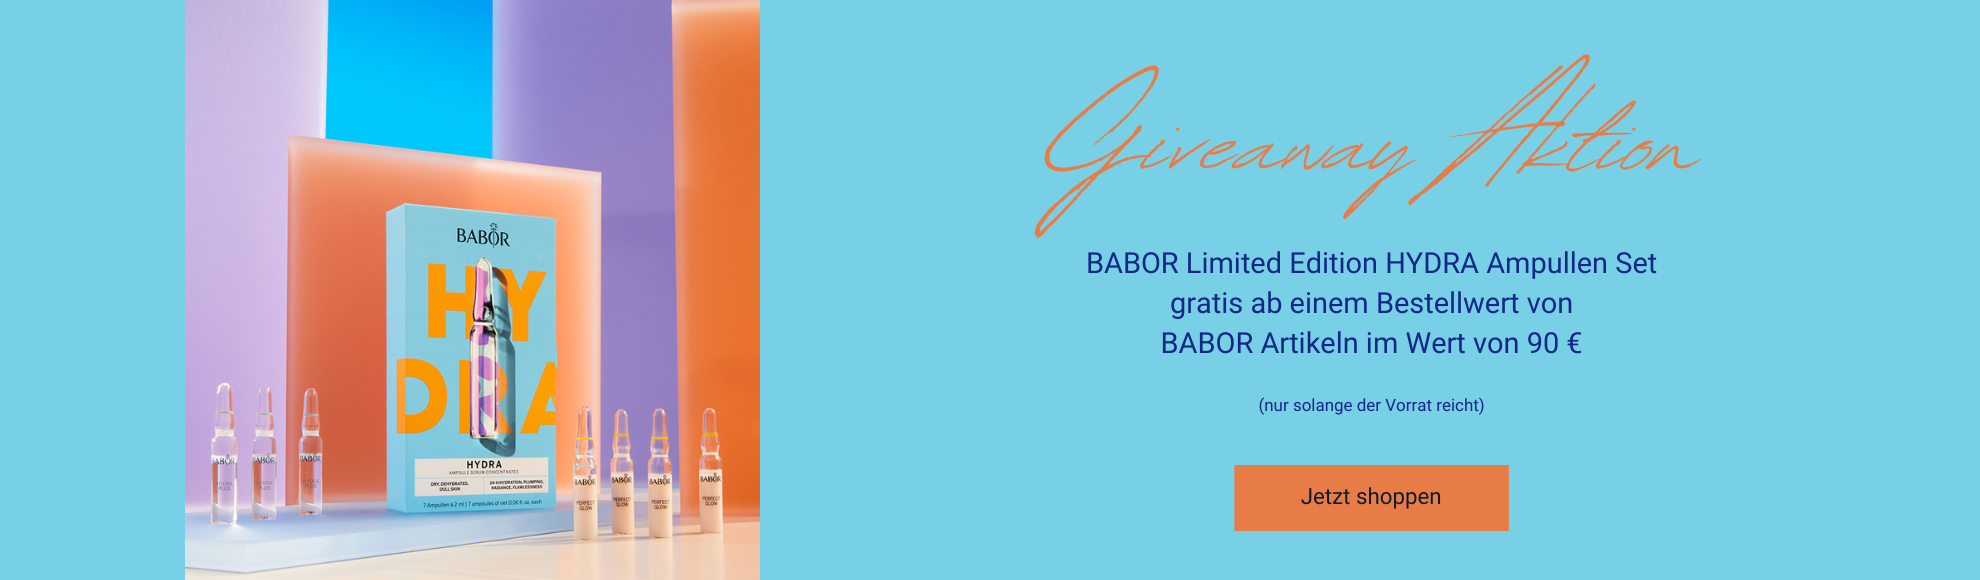 BABOR Limited Edition HYDRA Ampullen Set